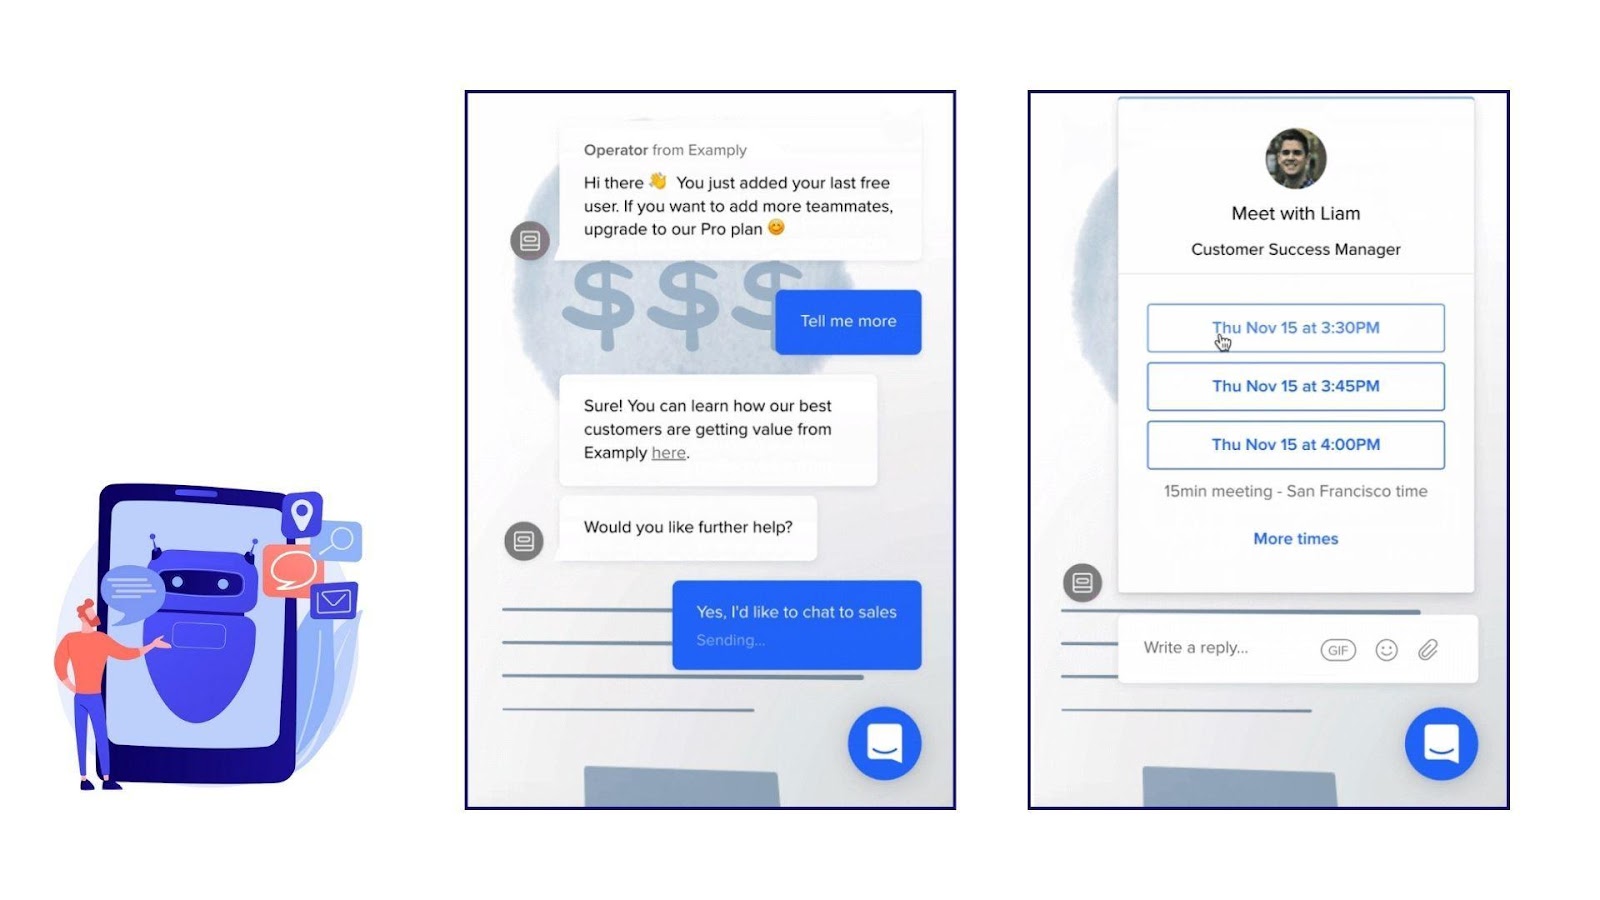 Screenshots of a personalized interaction with a chatbot that takes place right after the customer reaches a limit with software, presenting an upsell opportunity.